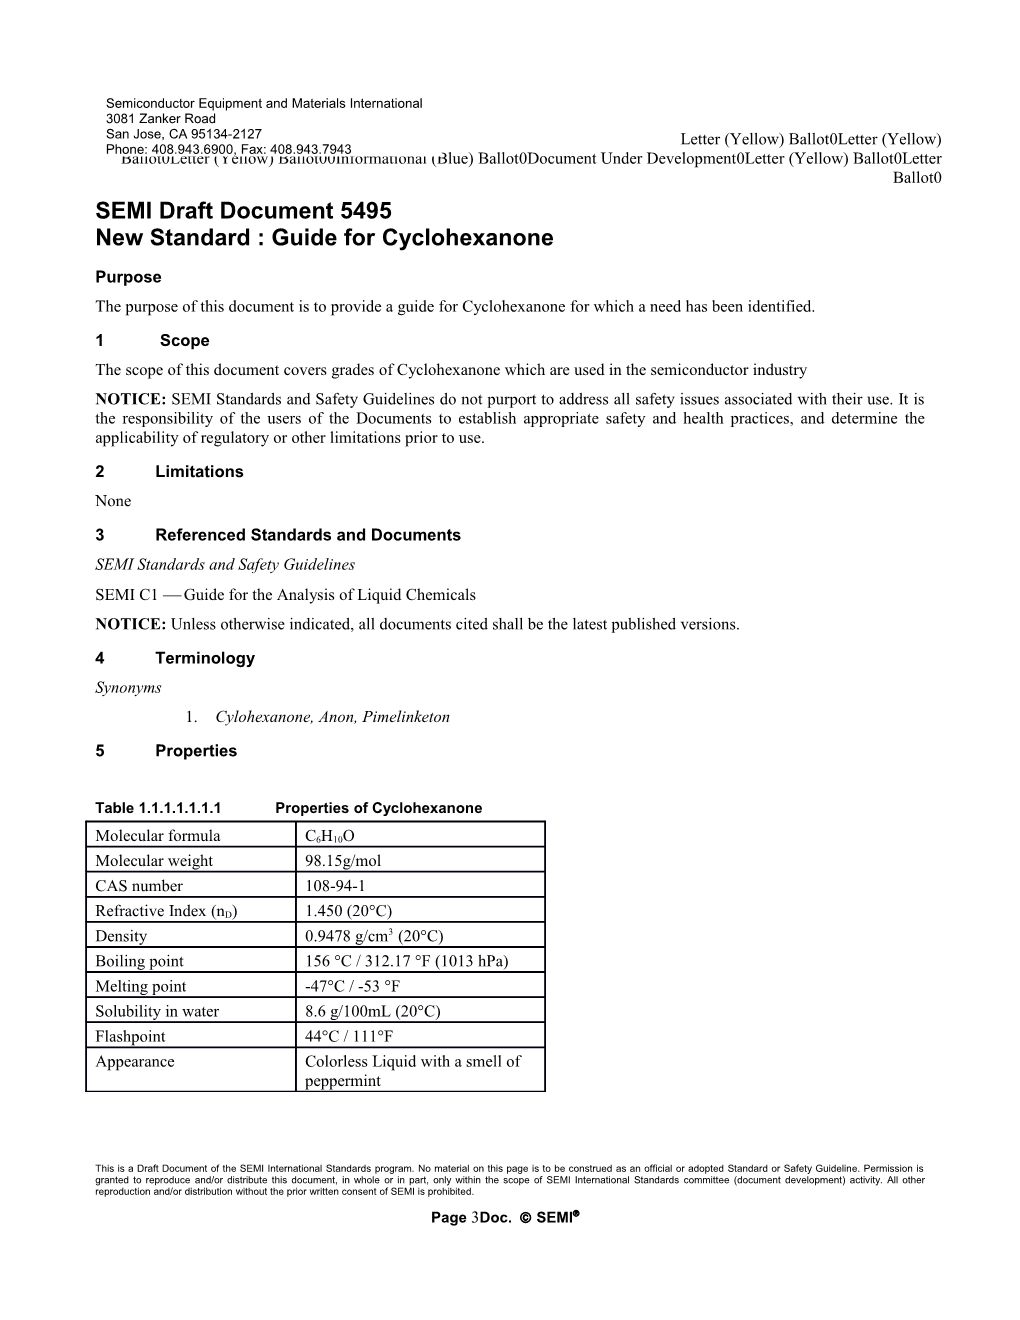 Background Statement for SEMI Draft Document 5495